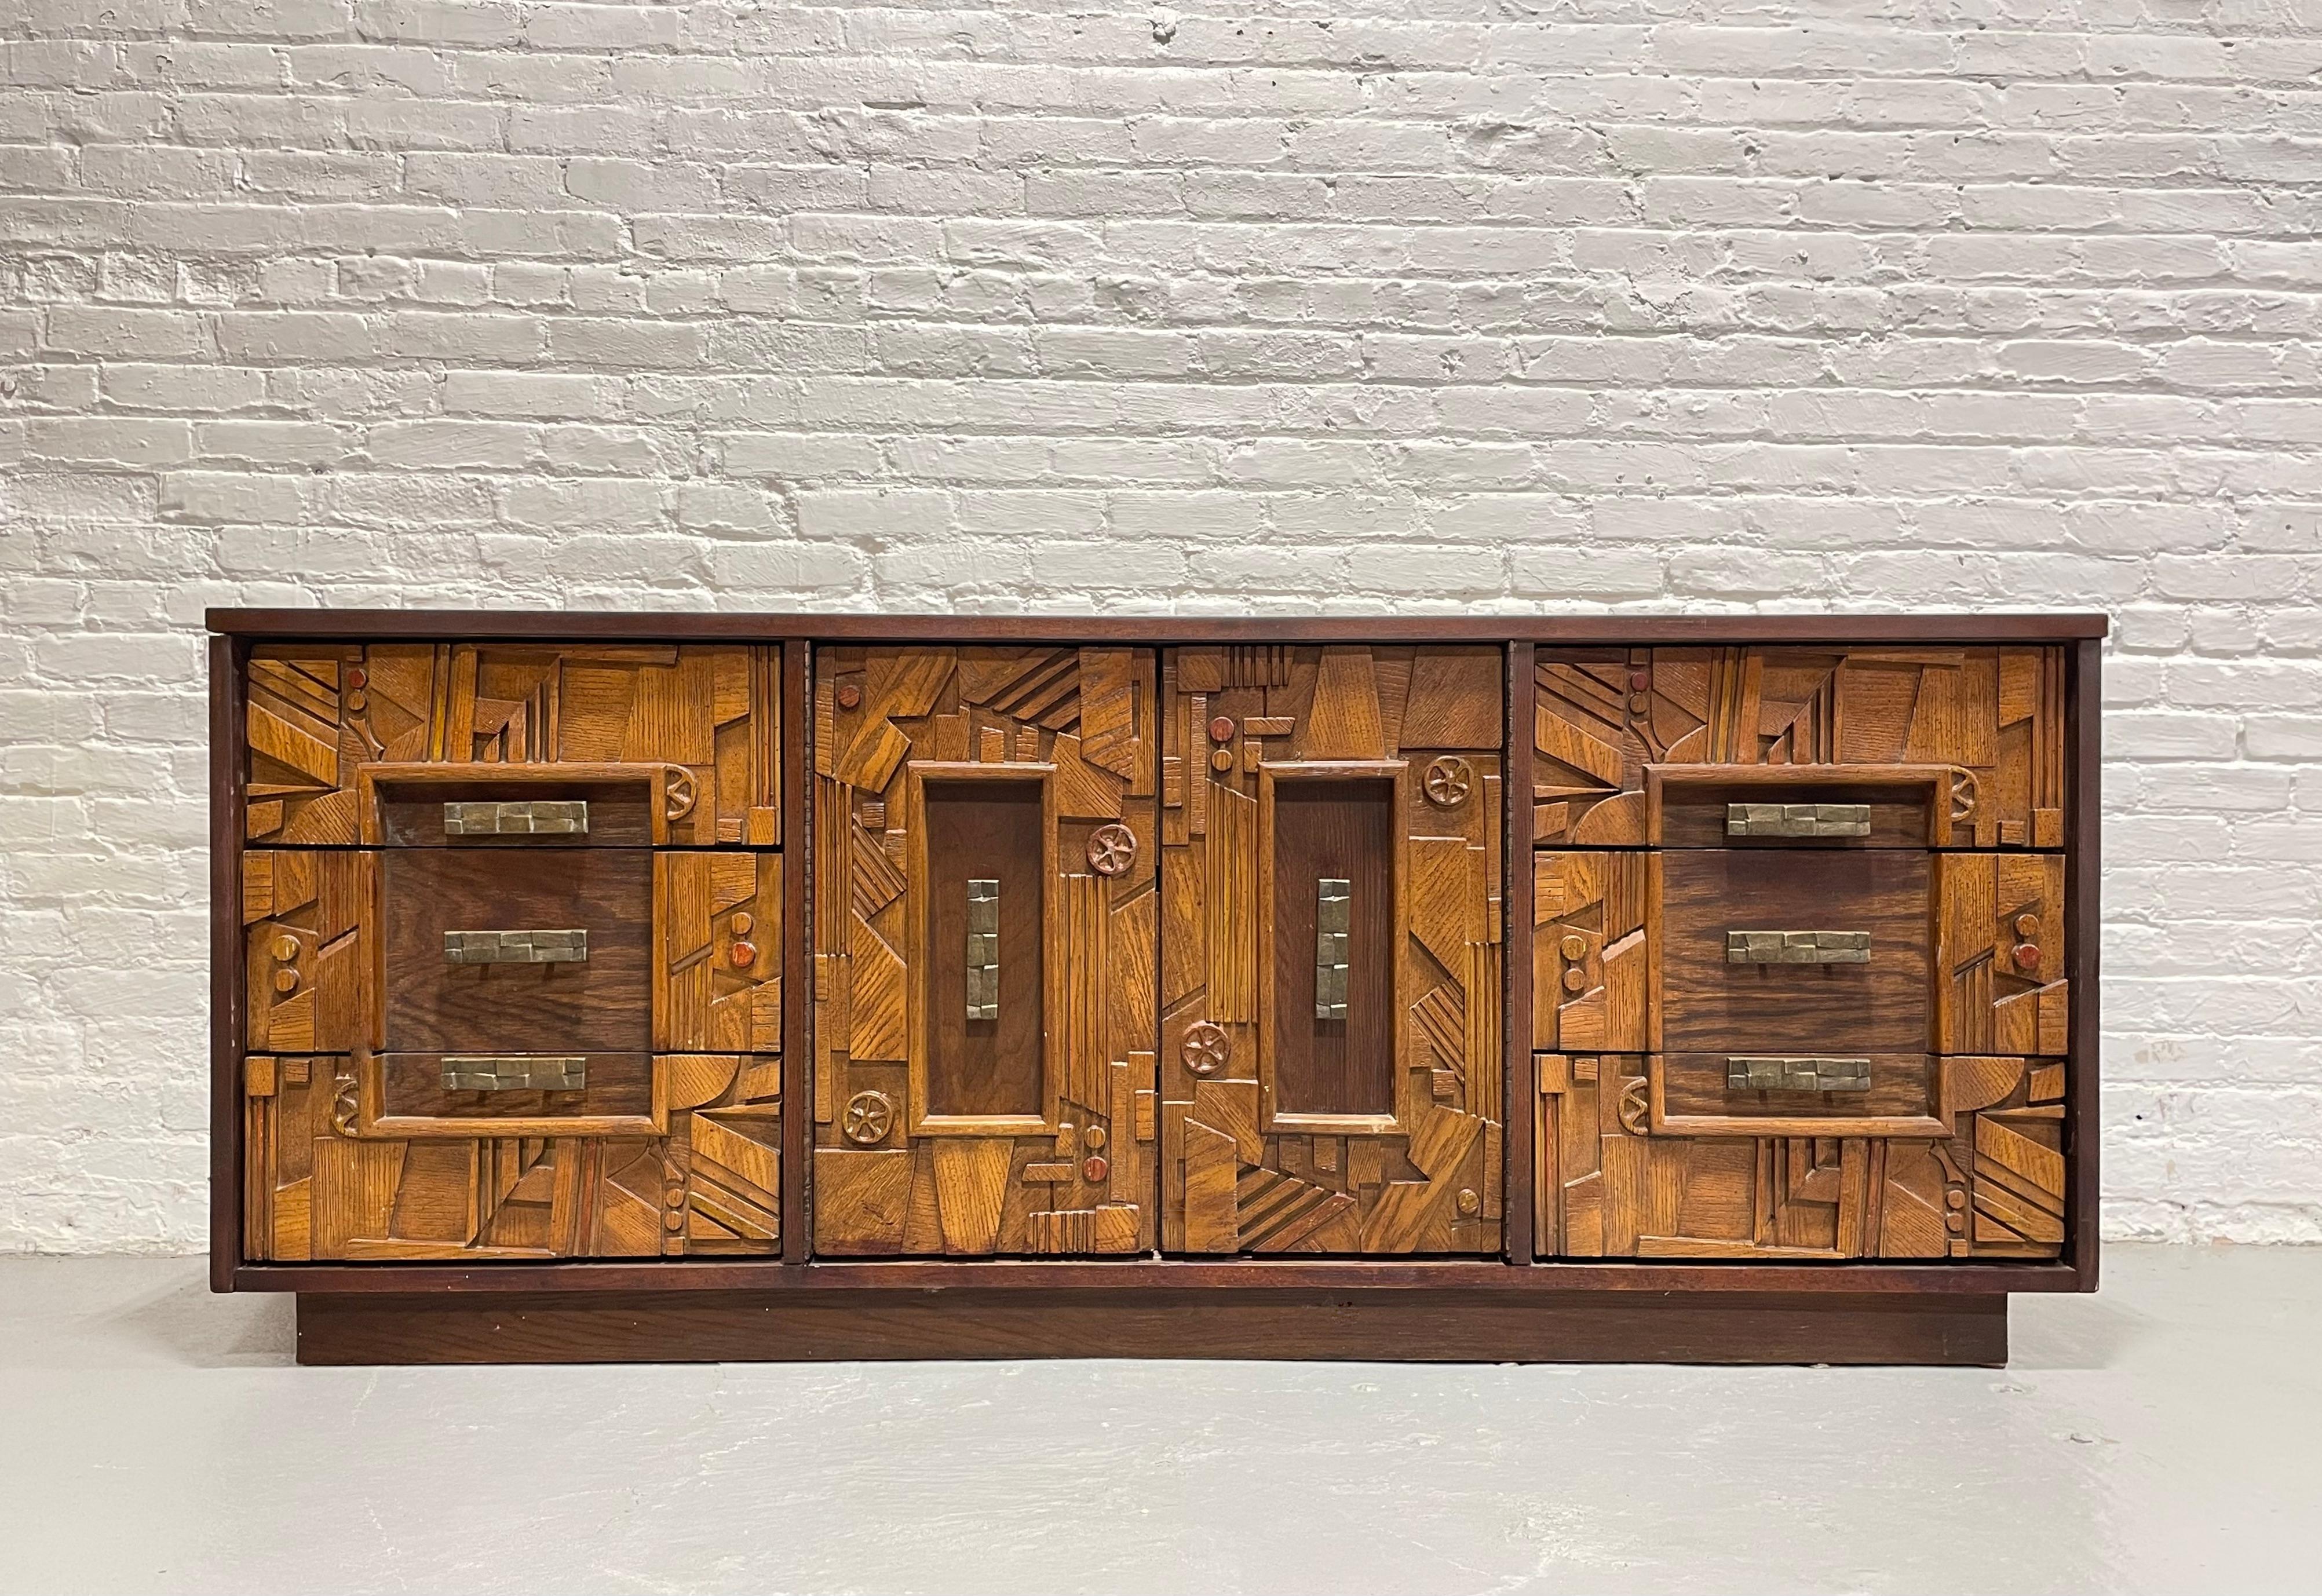 Mid Century Modern Long Dresser in a Paul Evans Brutalist style, c. 1960’s. The façade consists of a highly textured pattern of rough hewn shapes and each piece was carefully sculpted from solid wood with brutalist, pueblo inspired carvings.  Loads